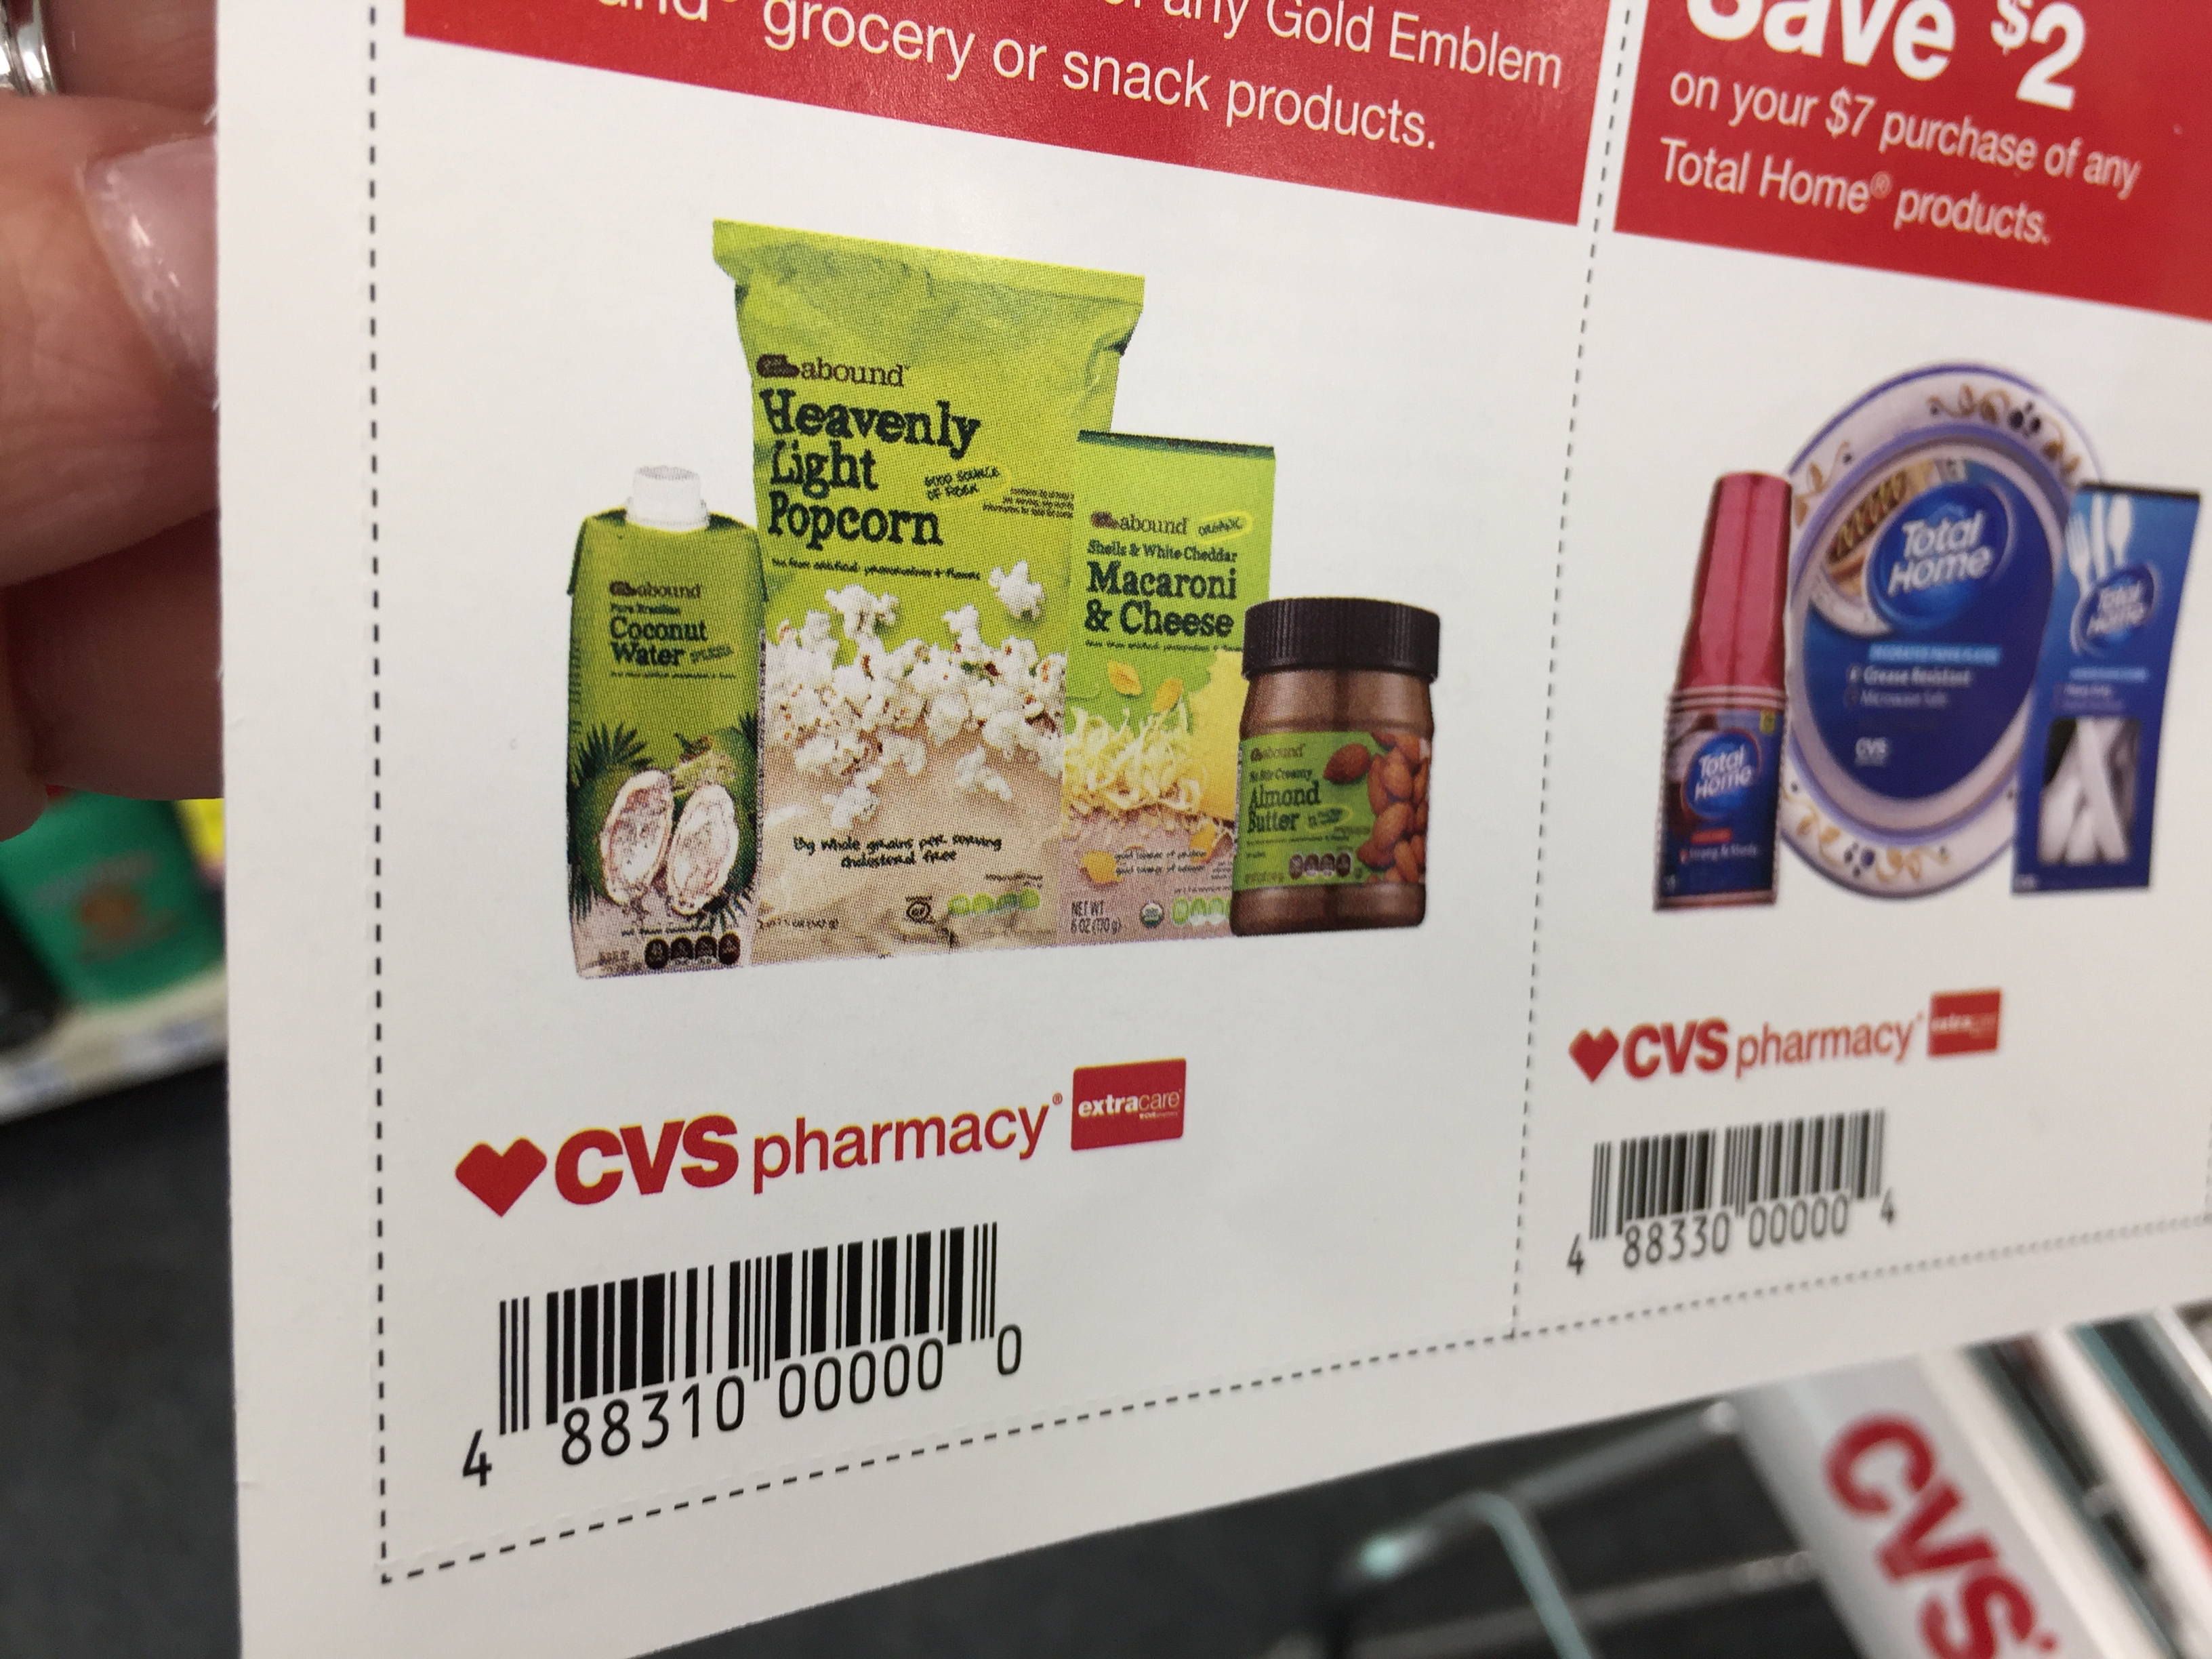 23 money saving tips you may not know about shopping at cvspharmacy – coupons